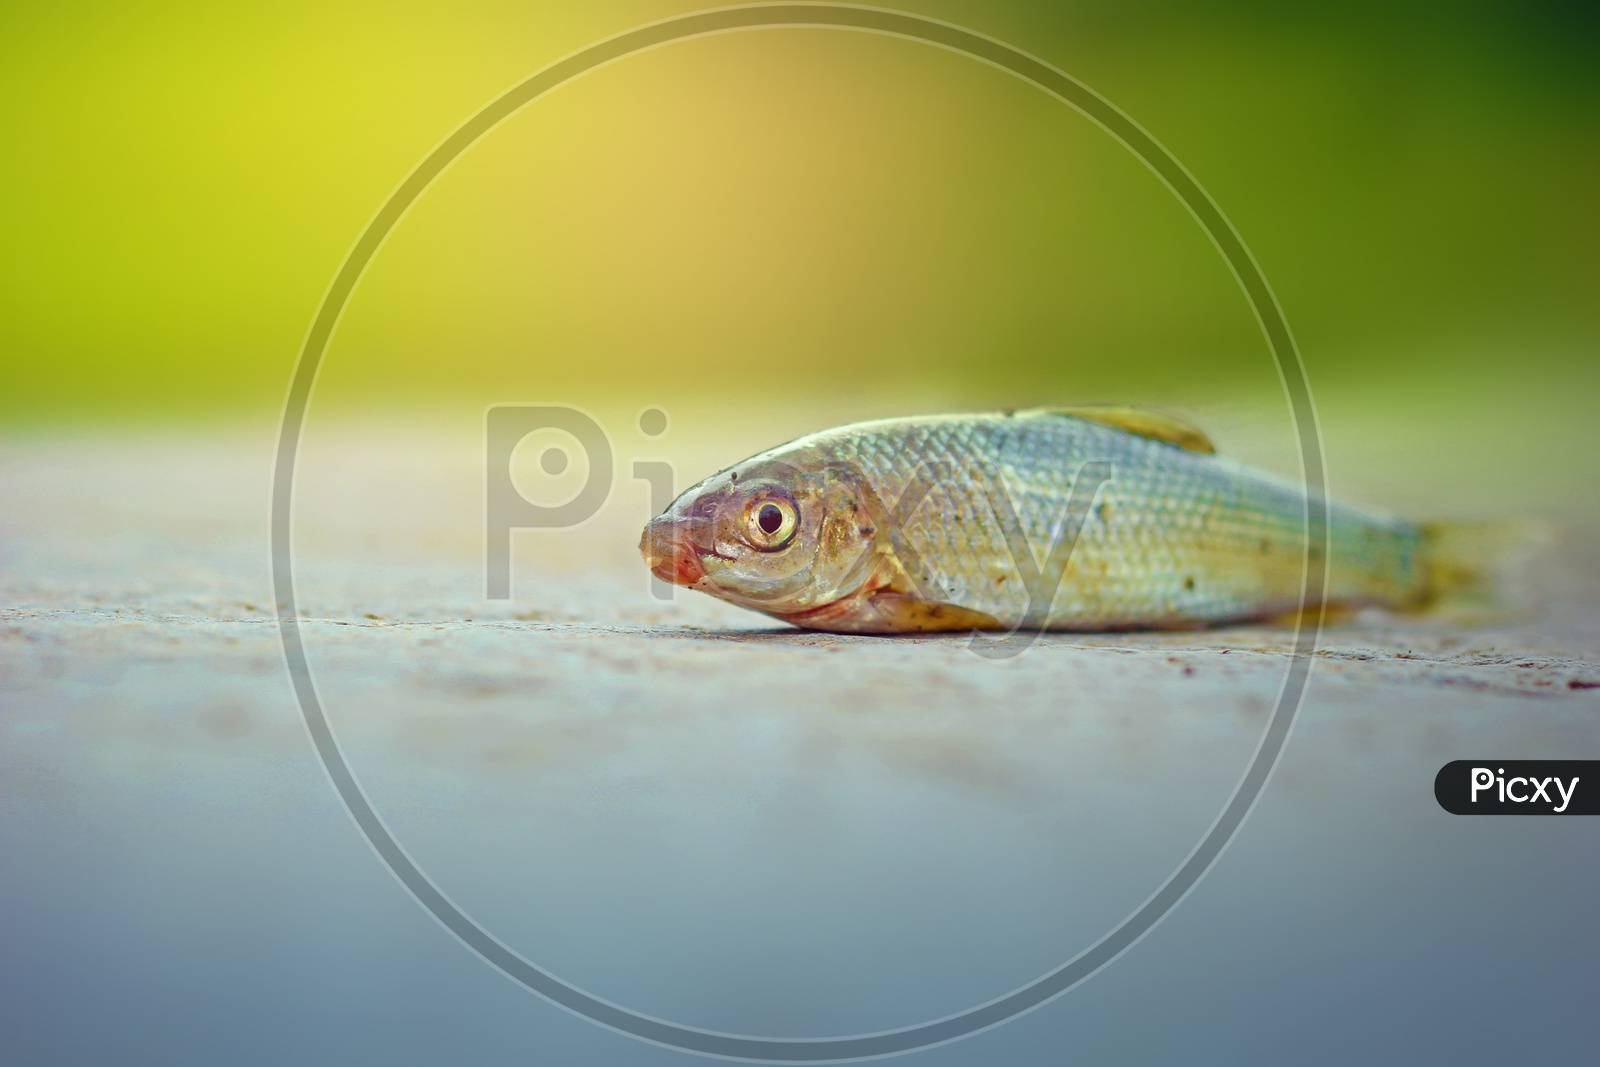 A  fish on land with green background